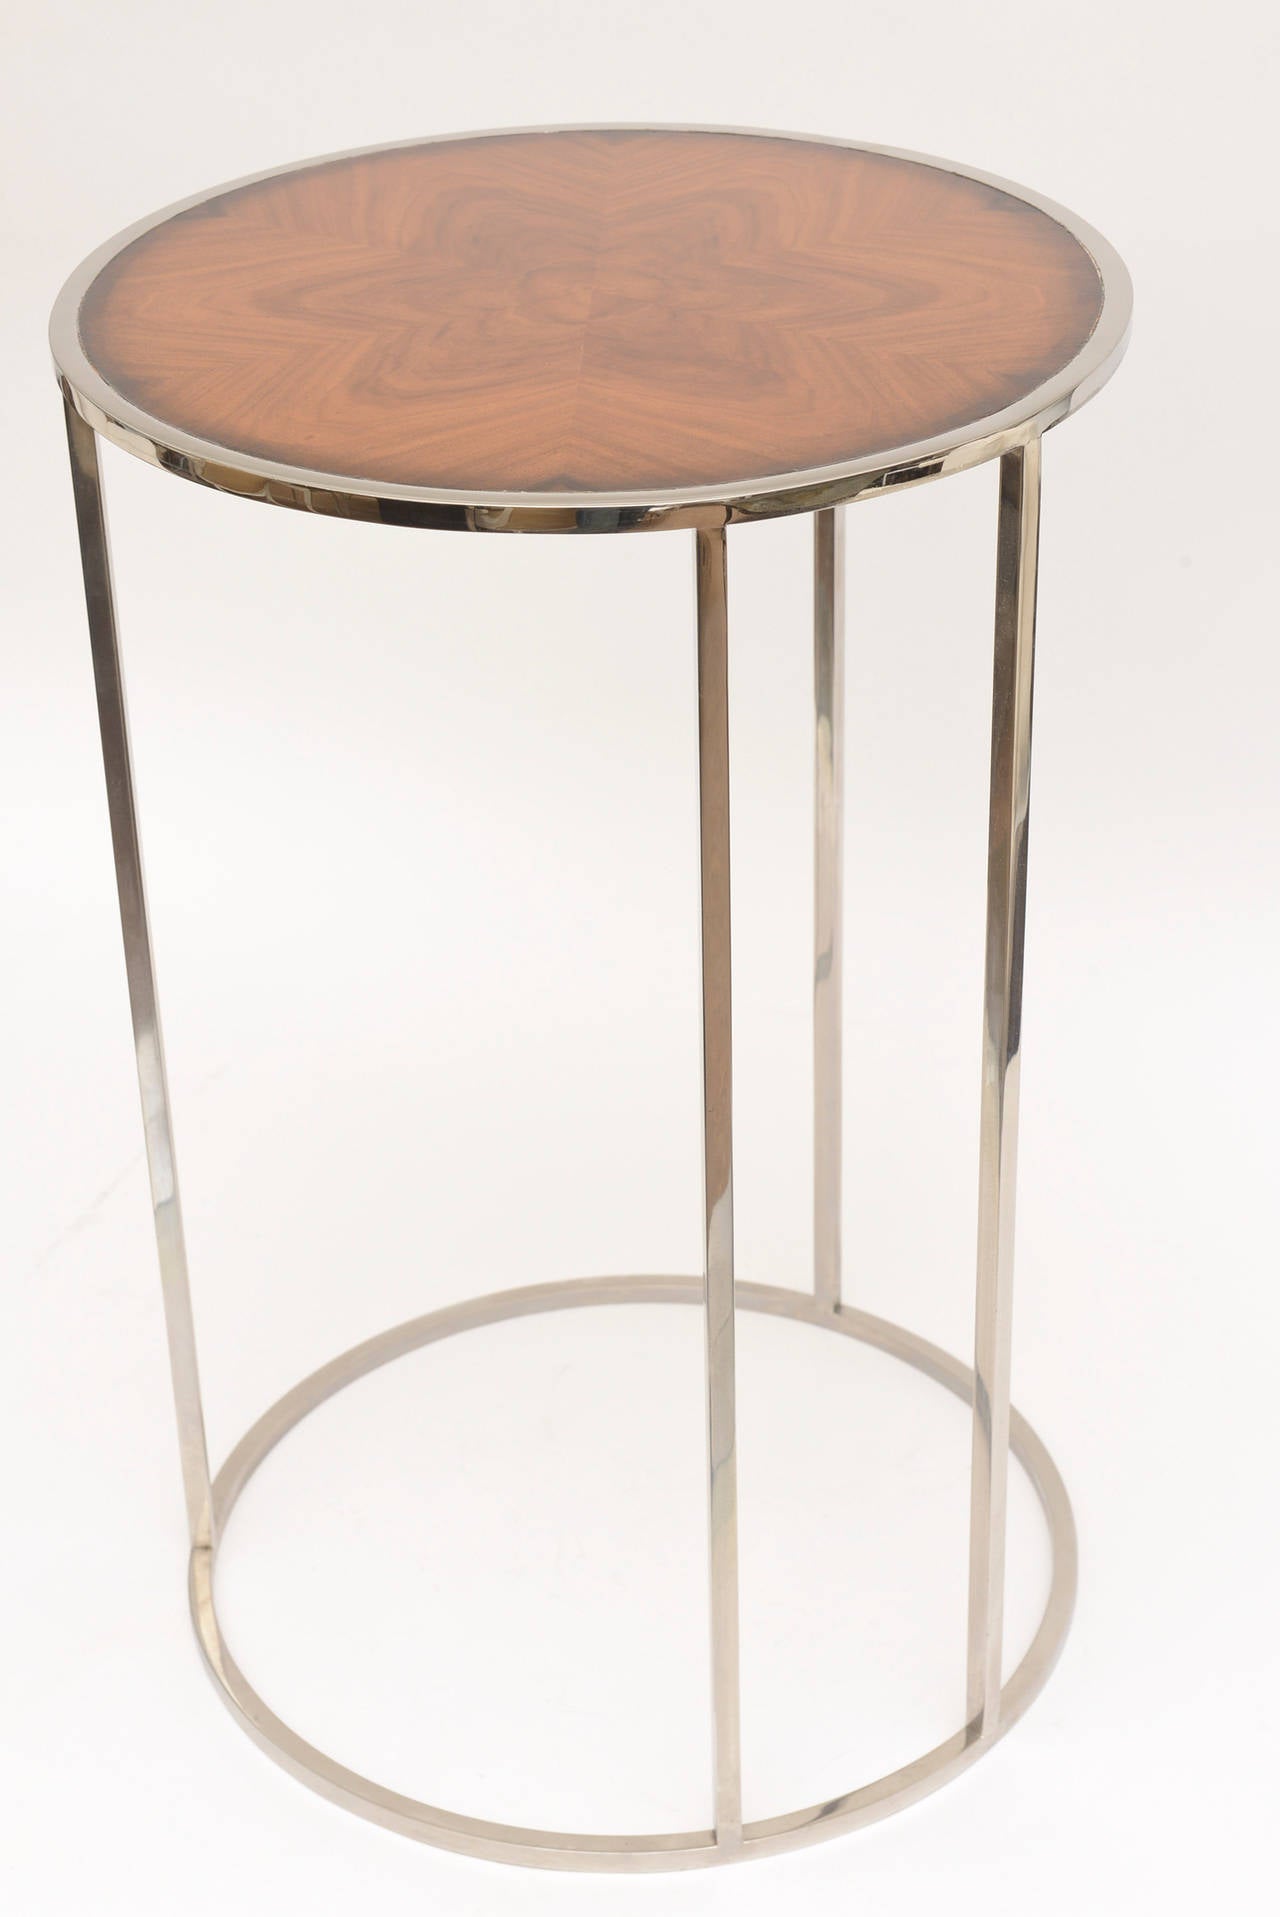 Italian Exotic Wood and Stainless Steel Nesting or Side Tables 4